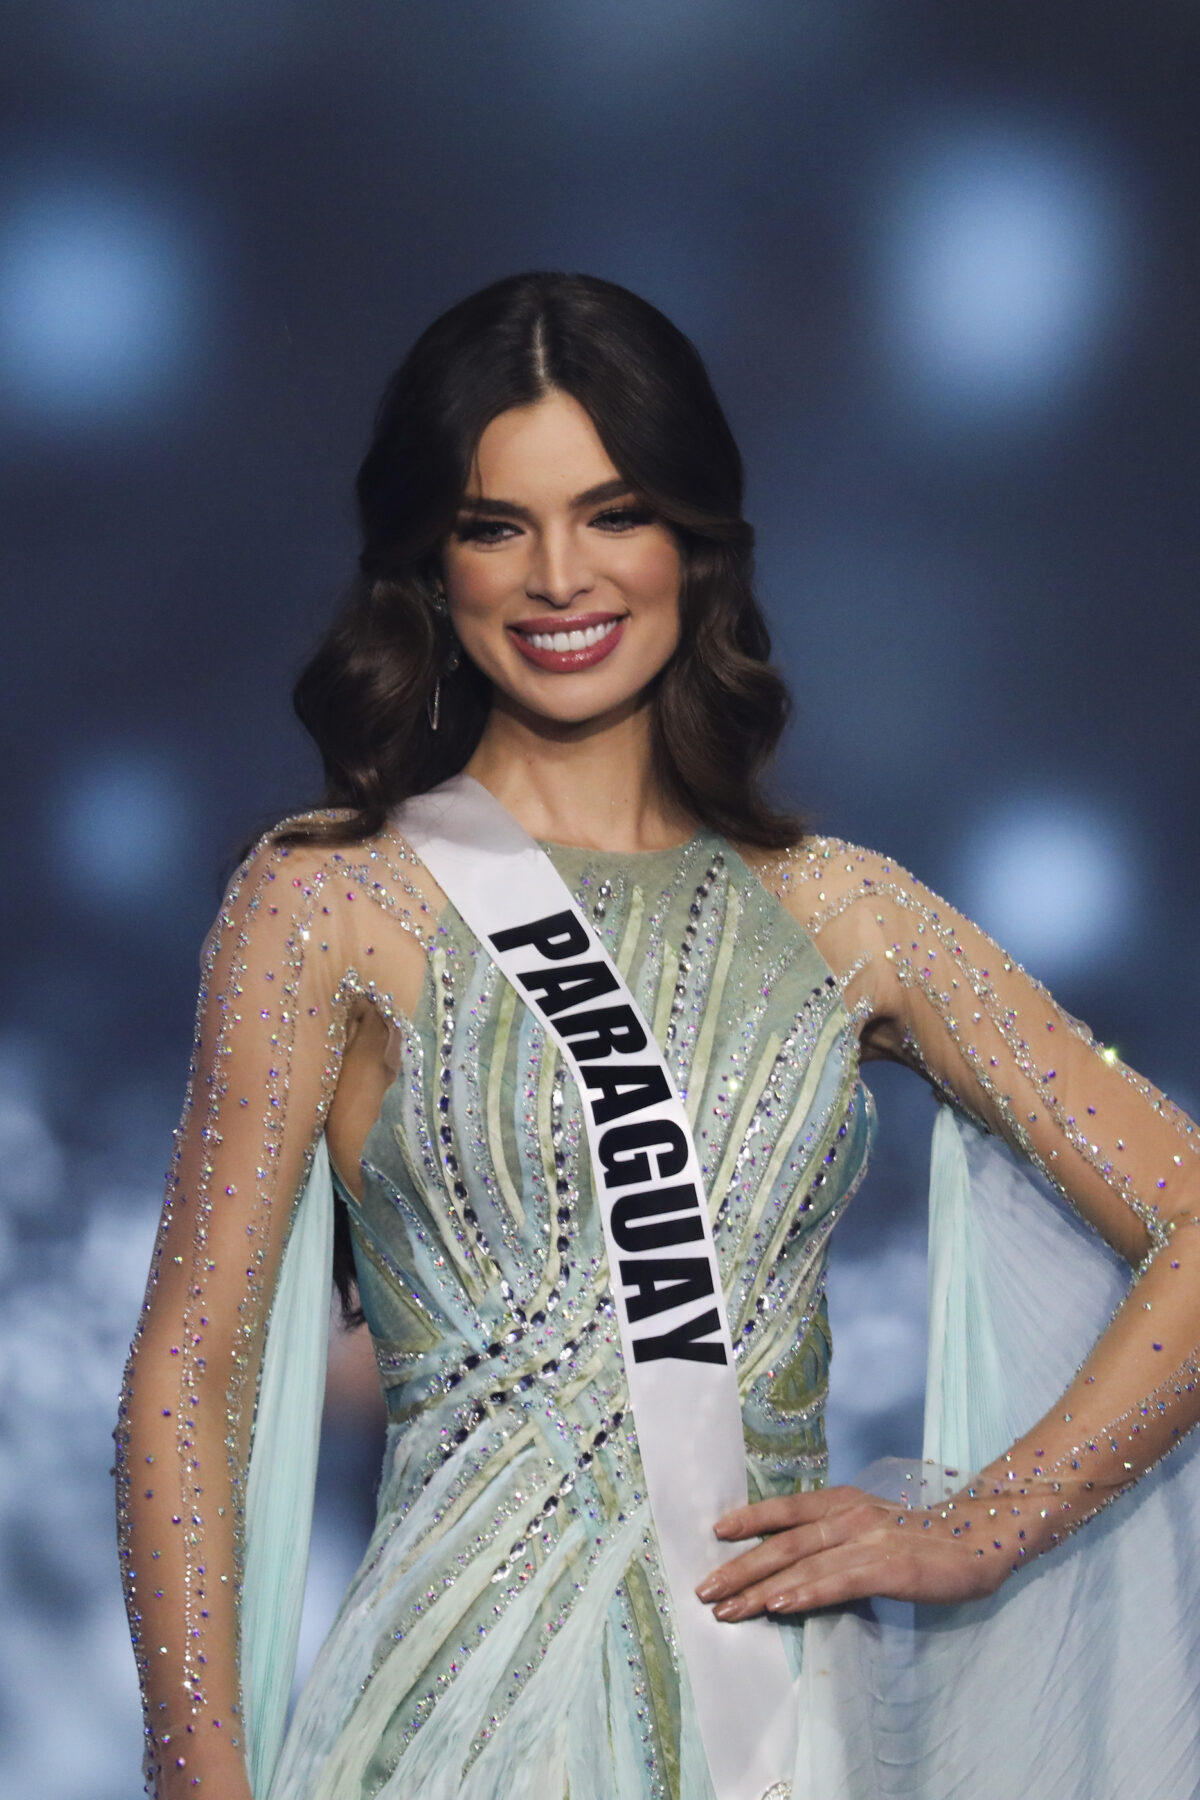 13 December 2021, Israel, Eilat: Miss Paraguay, Nadia Ferreira, competes during the 70th Miss Universe beauty pageant in Israel's southern Red Sea coastal city of Eilat. Photo: Ilia Yefimovich/dpa